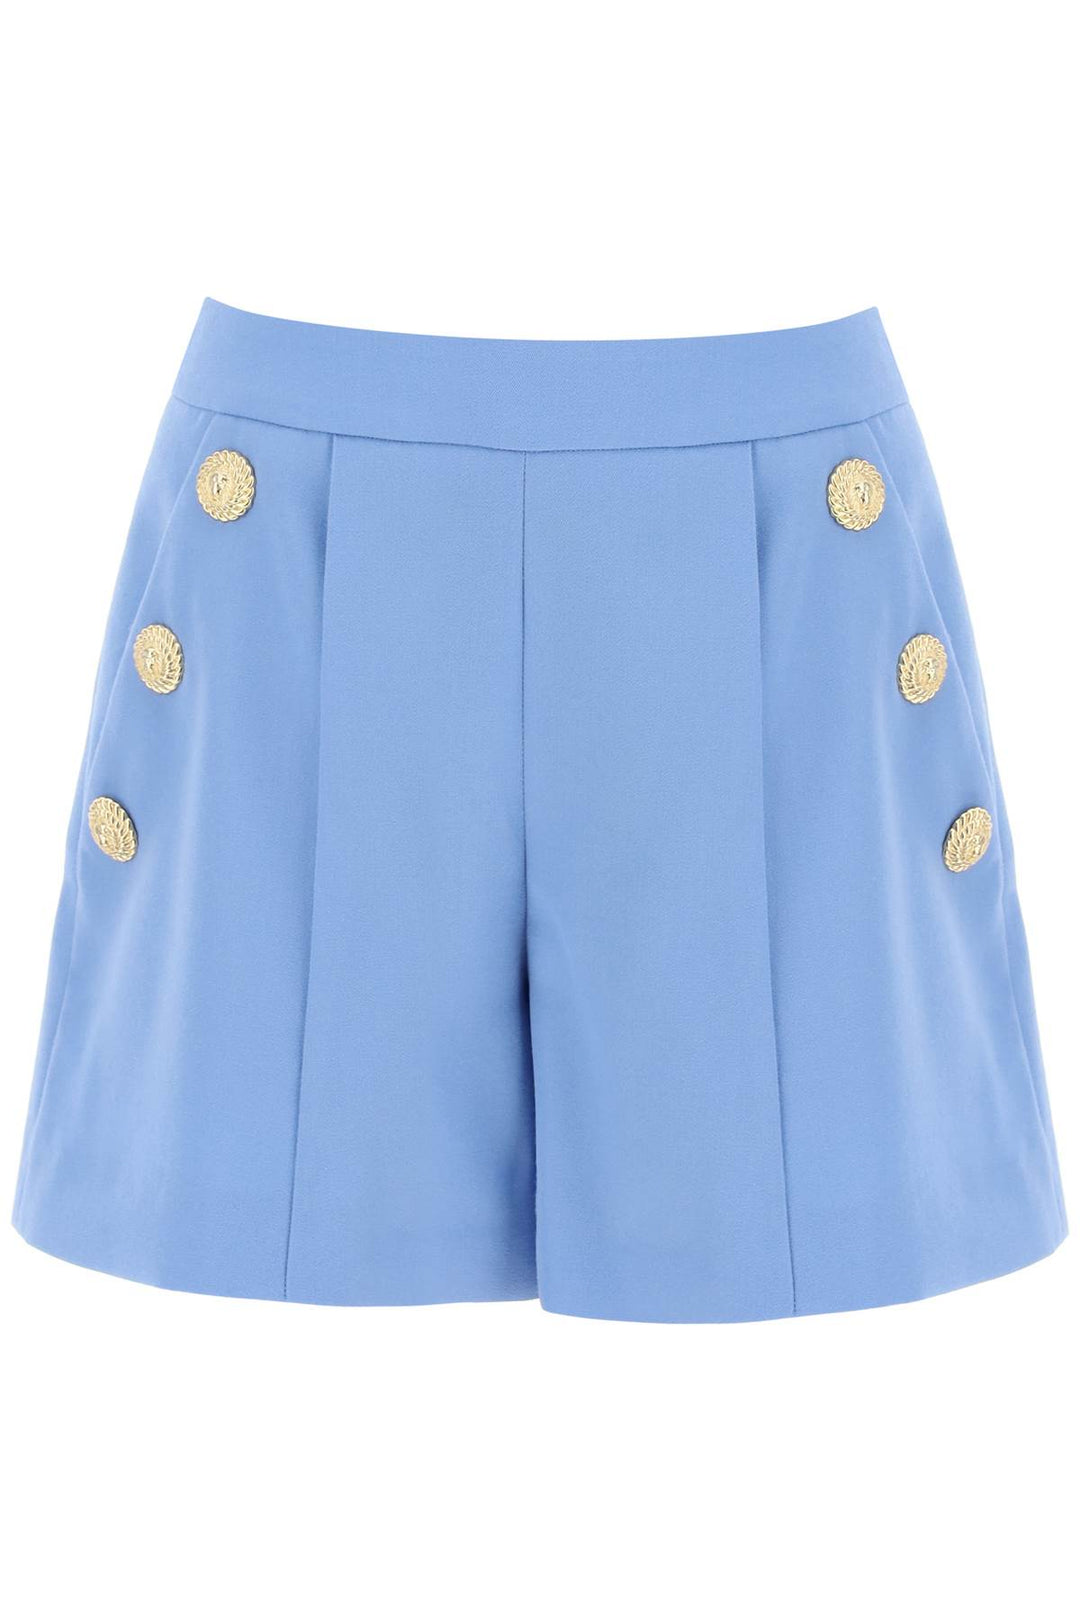 Balmain Embossed Button Shorts With   Light Blue